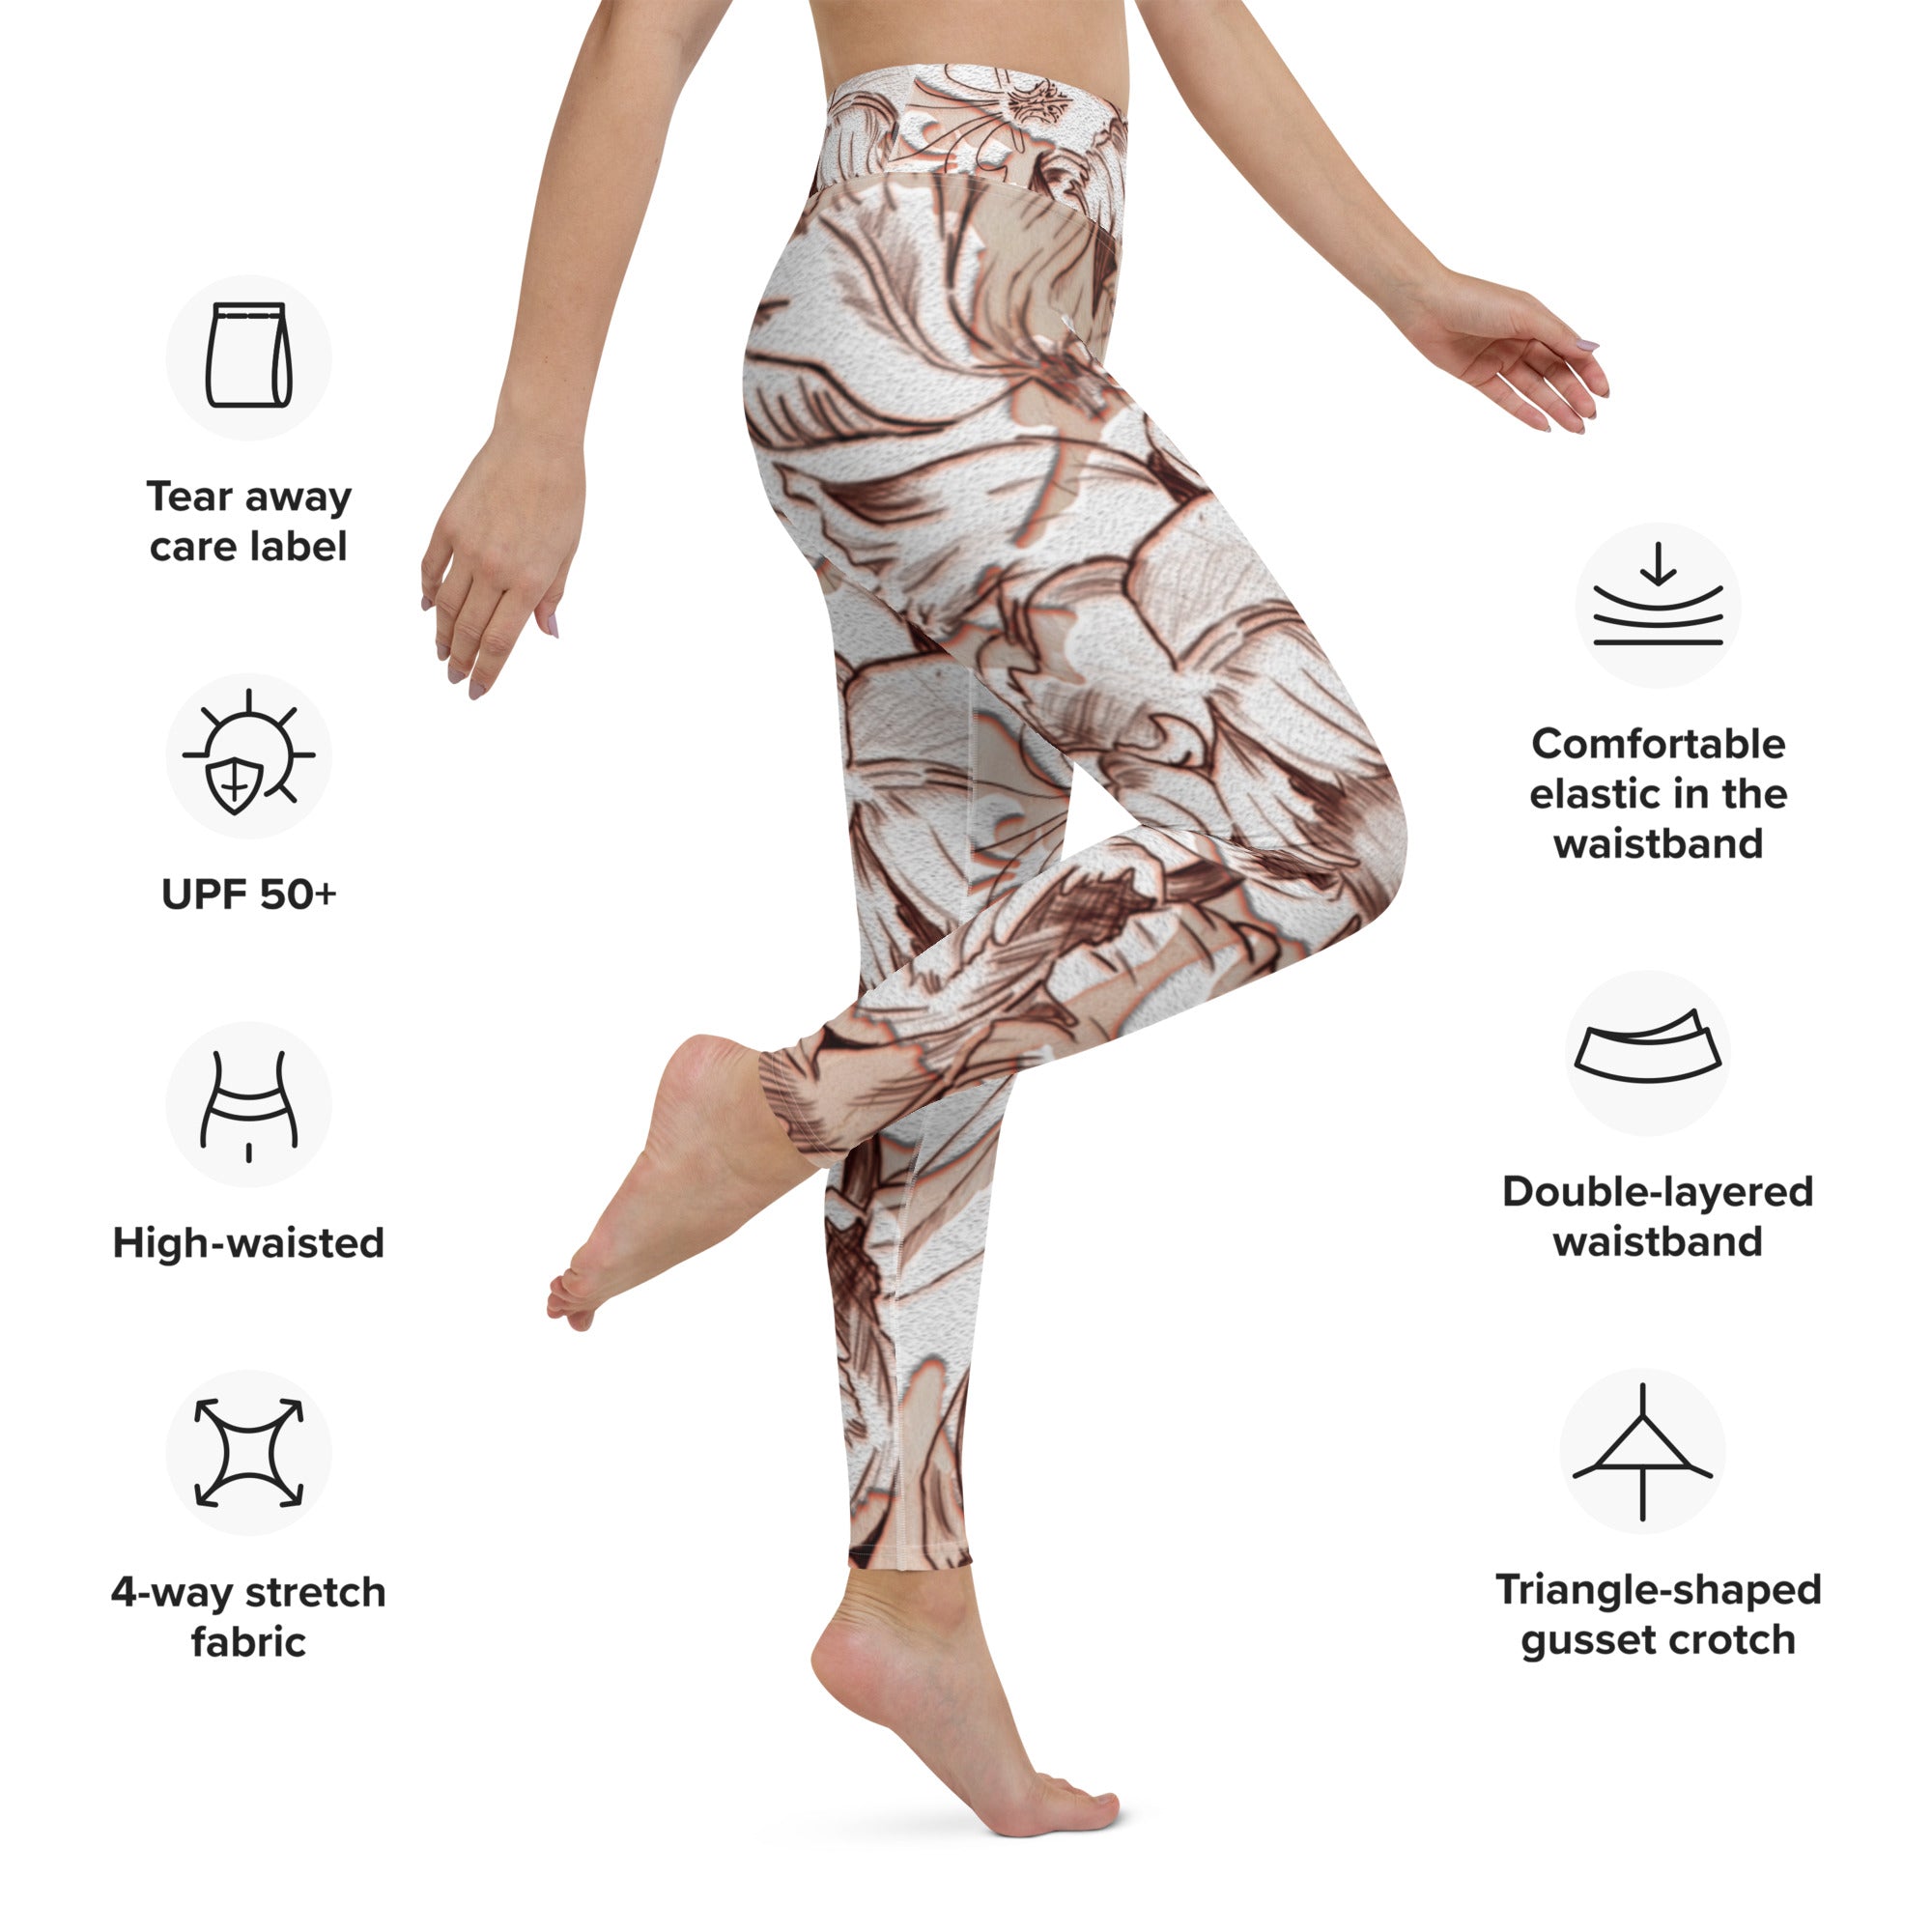 Anacotte Elated Floral High Waisted Light Yoga Pants